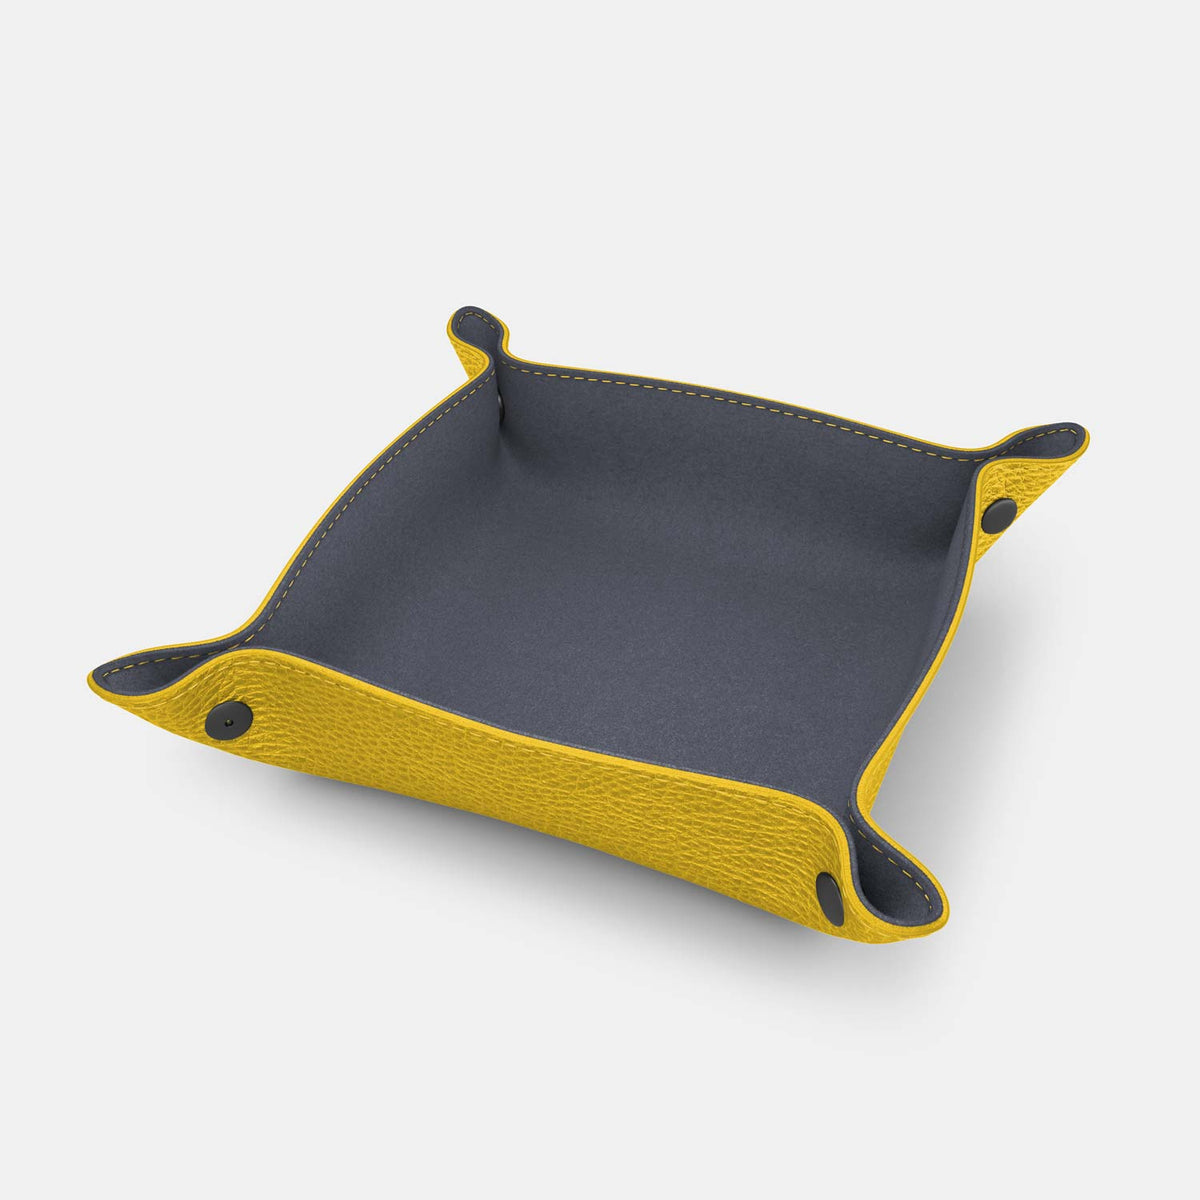 Leather Catch-all Tray - Yellow and Grey